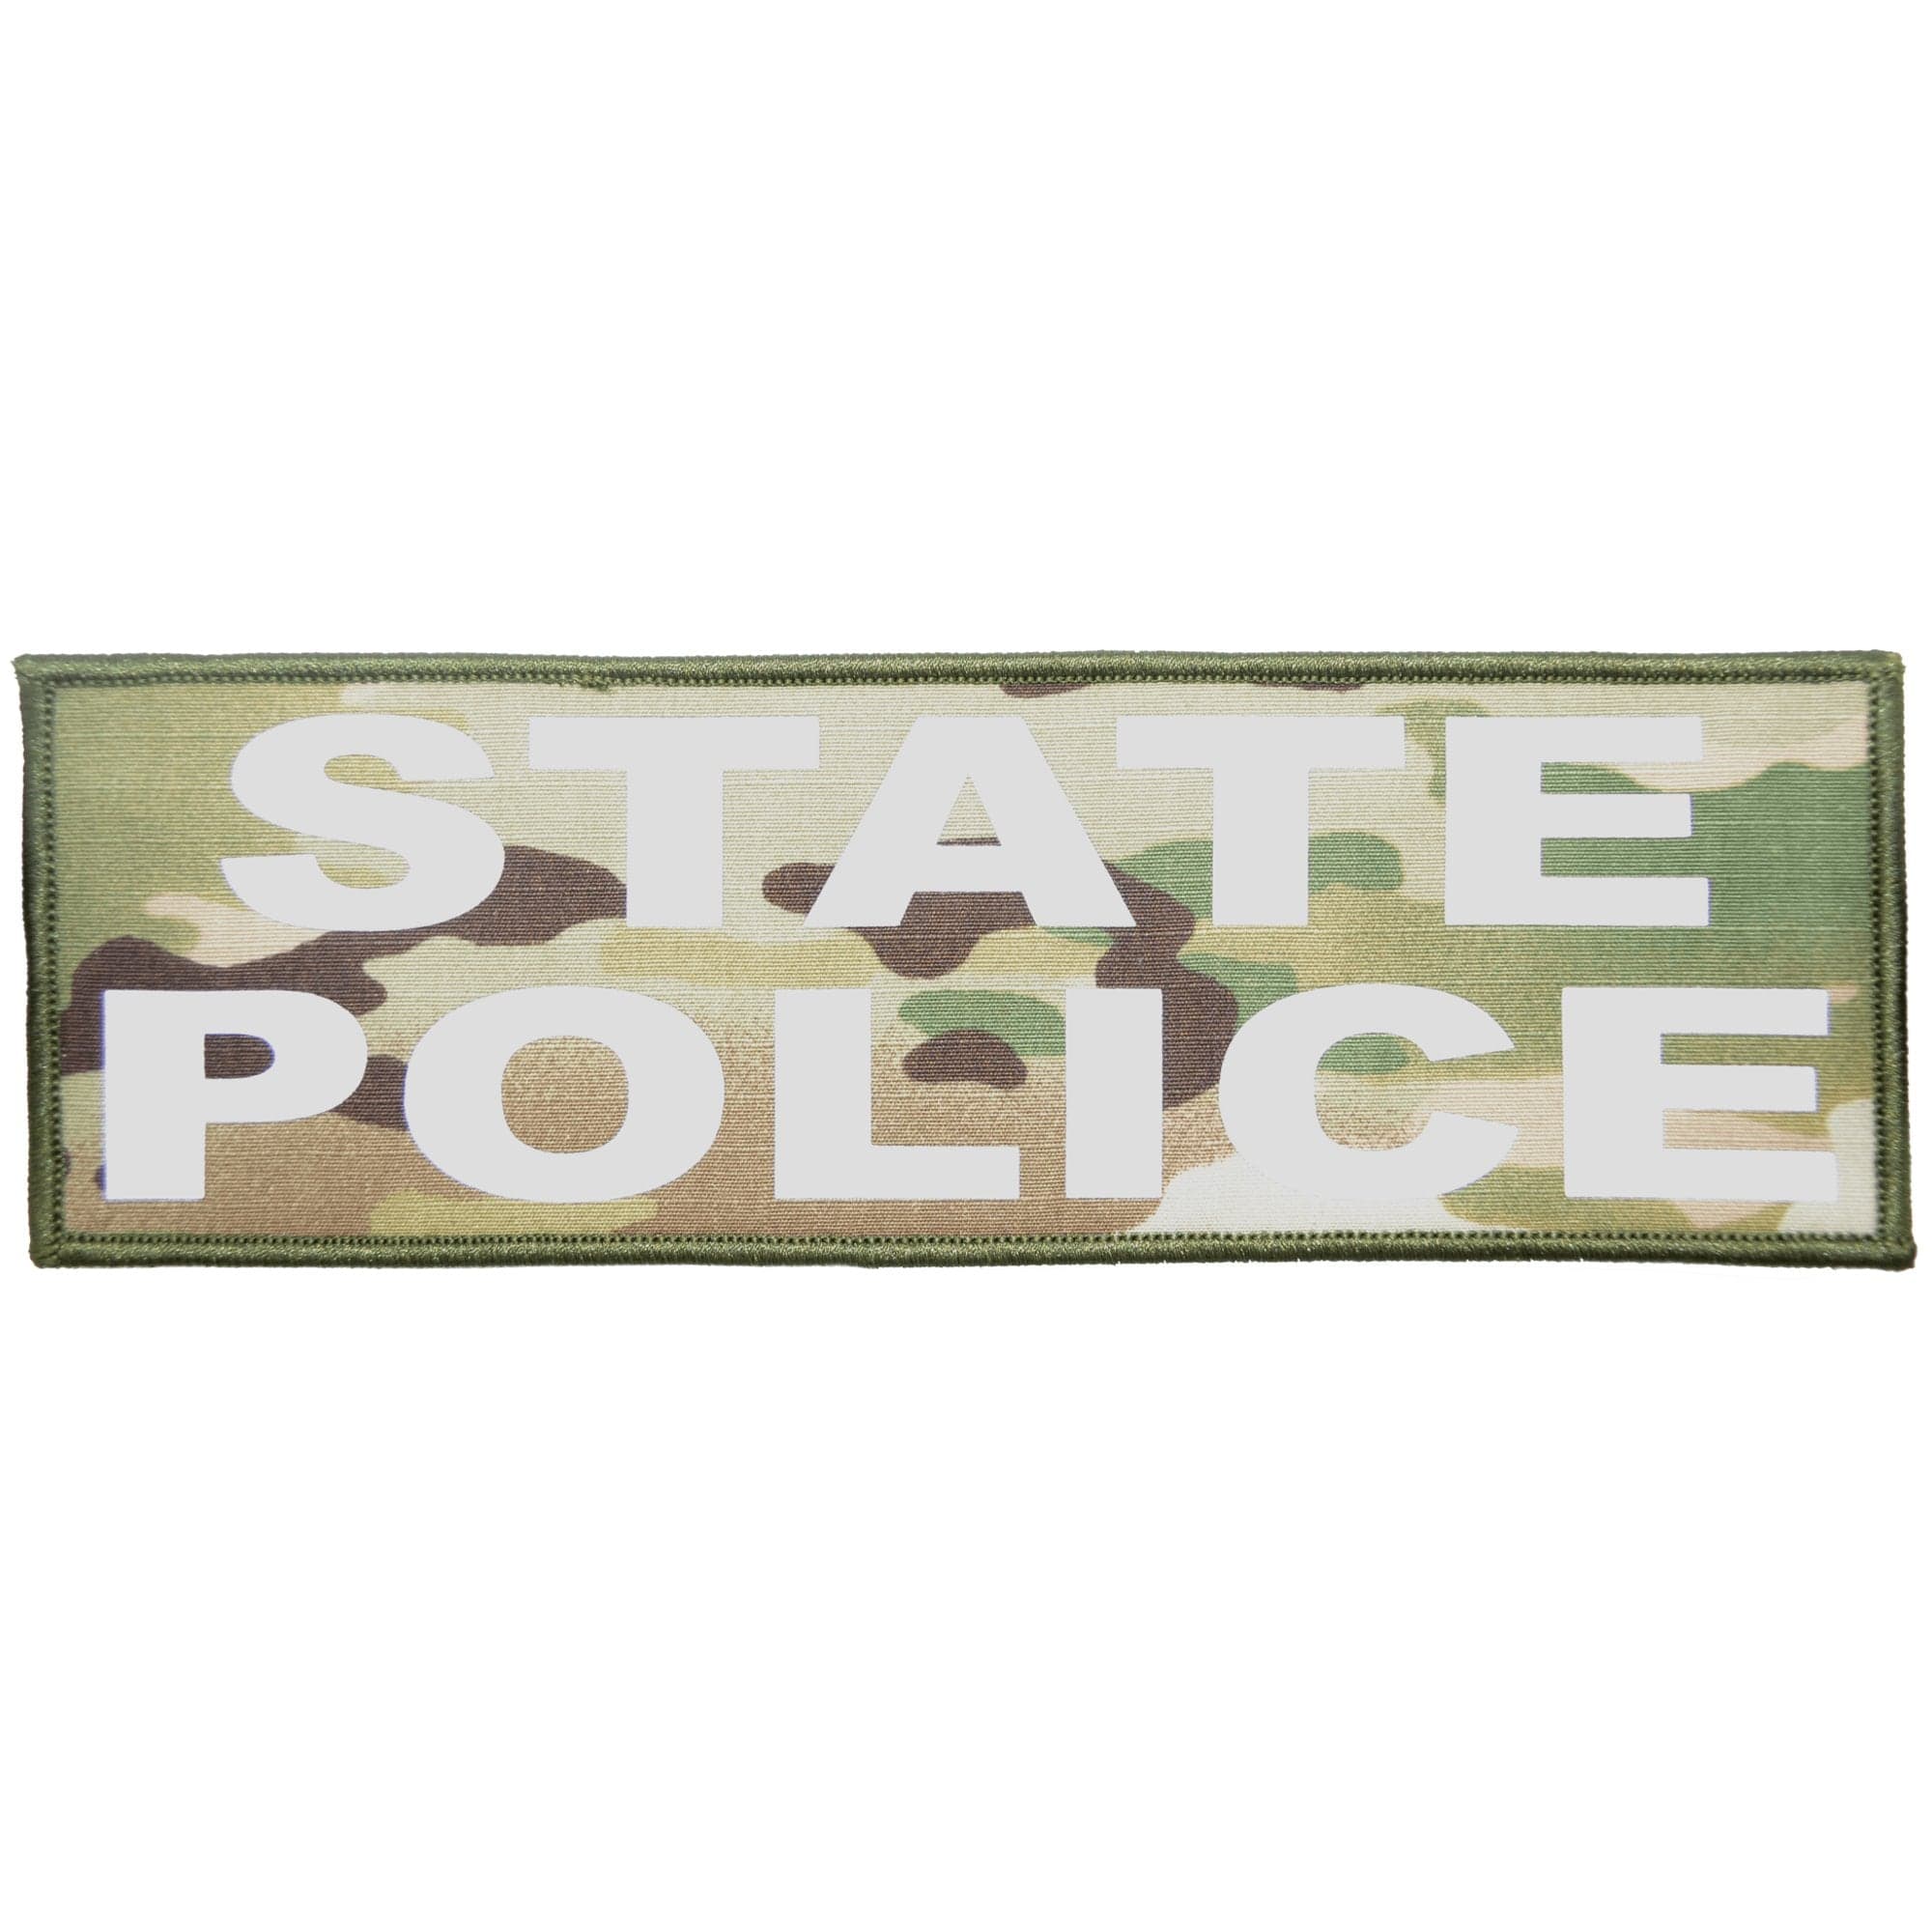 Police Tactical Patches - R1910